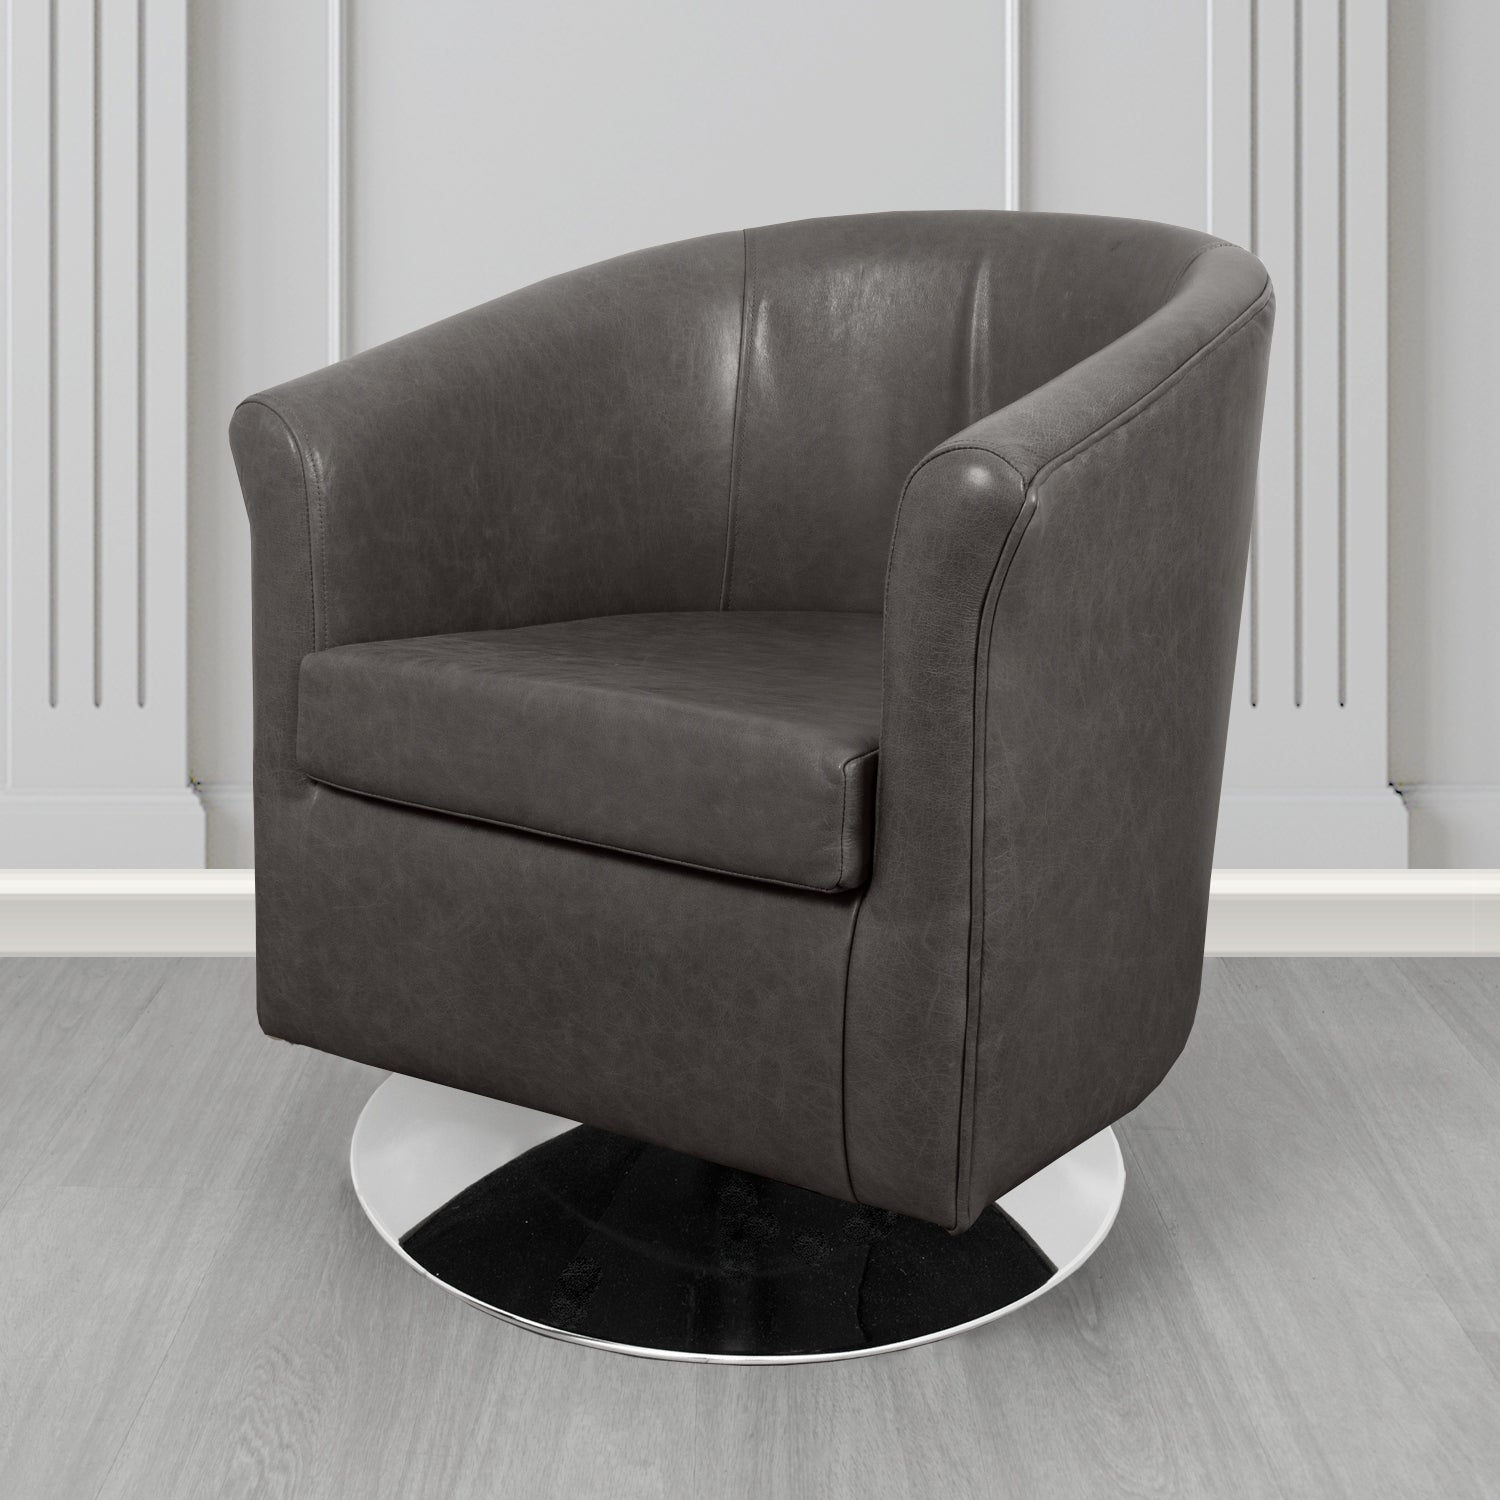 Tuscany Swivel Tub Chair in Crib 5 Old English Storm Genuine Leather - The Tub Chair Shop